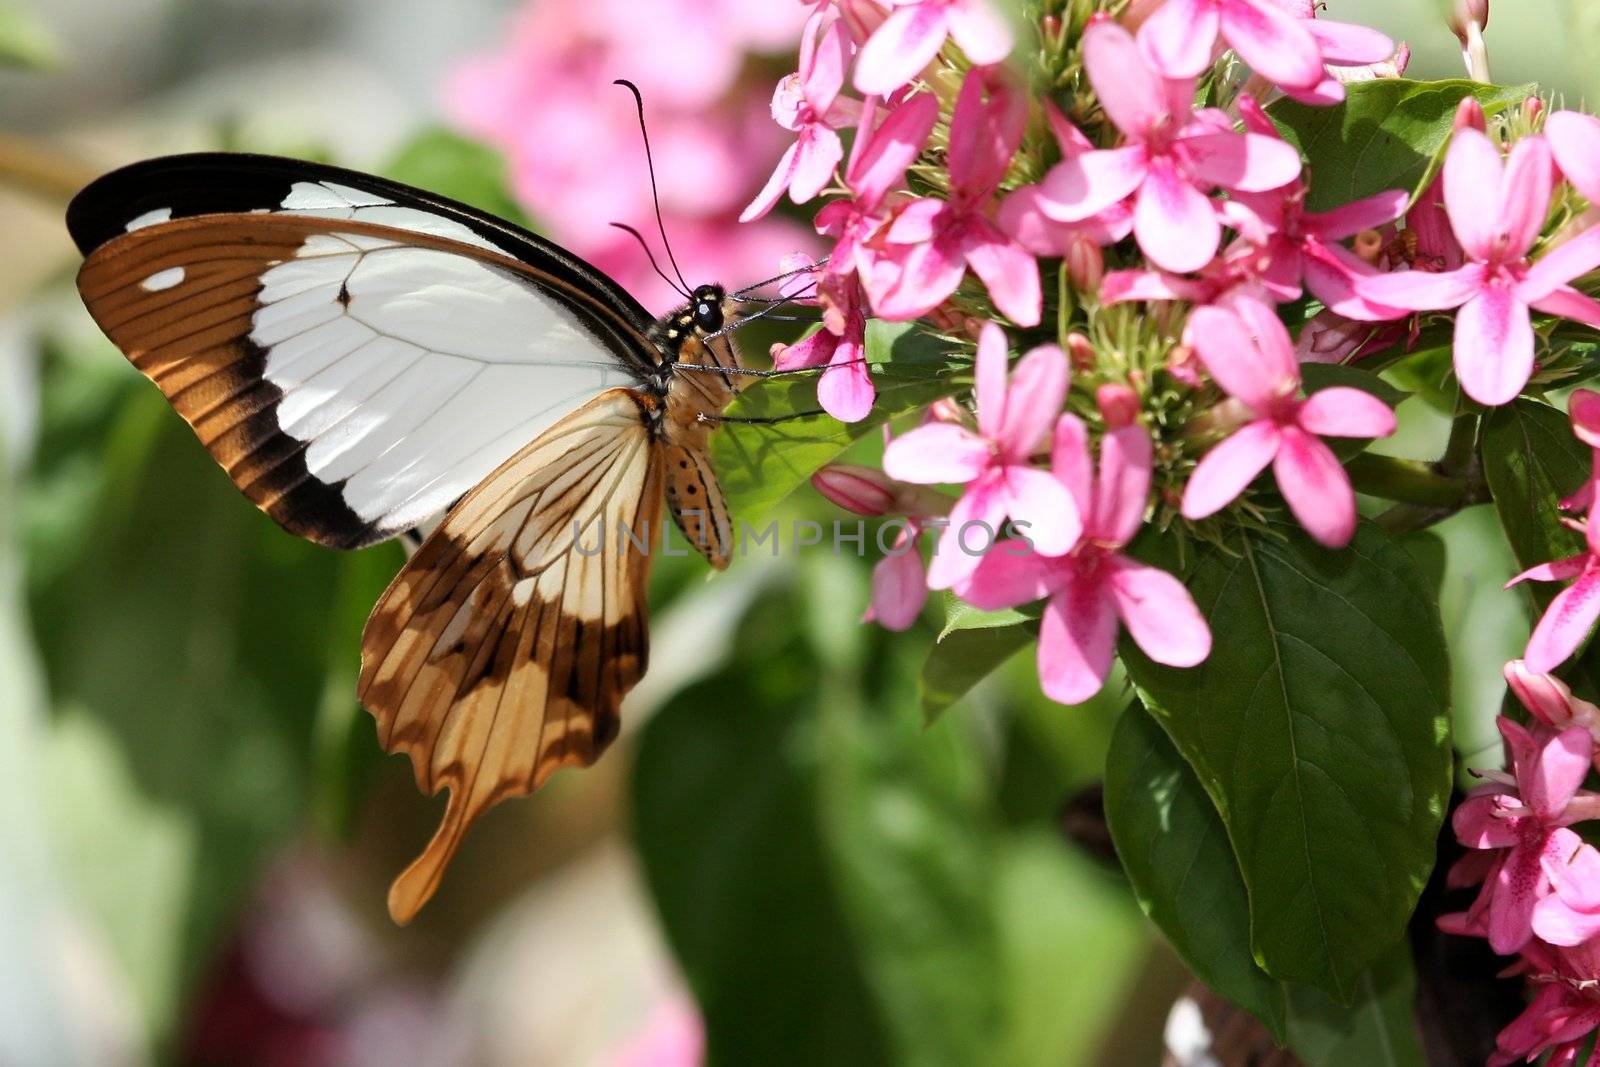 Brown and white swallowtail butterfly on pink flowers